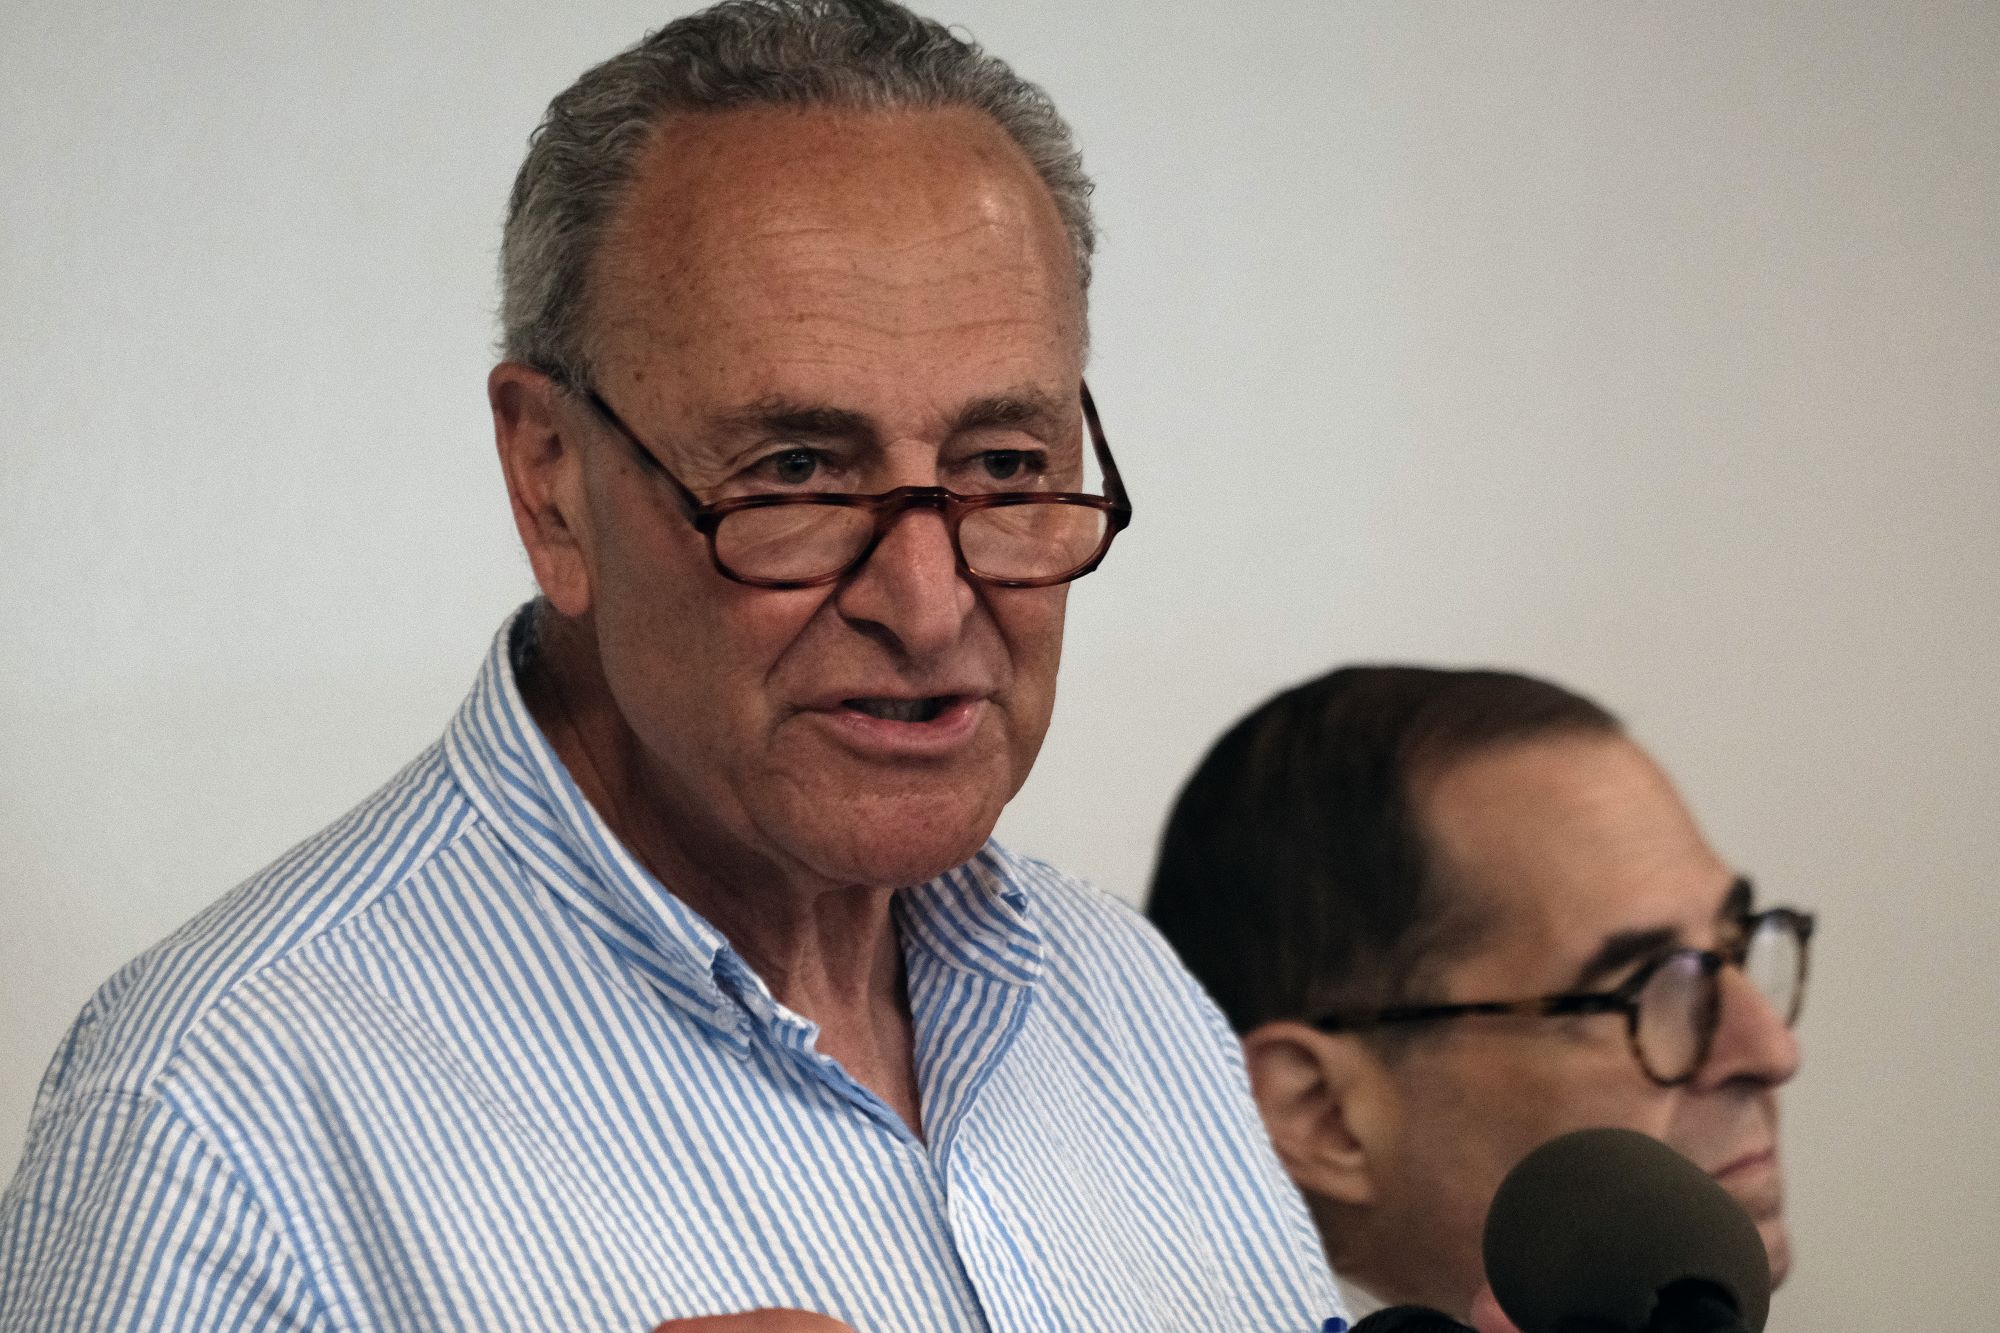 Schumer: Democrats Prepared to ‘Expeditiously Fill’ Any Supreme Court Vacancy